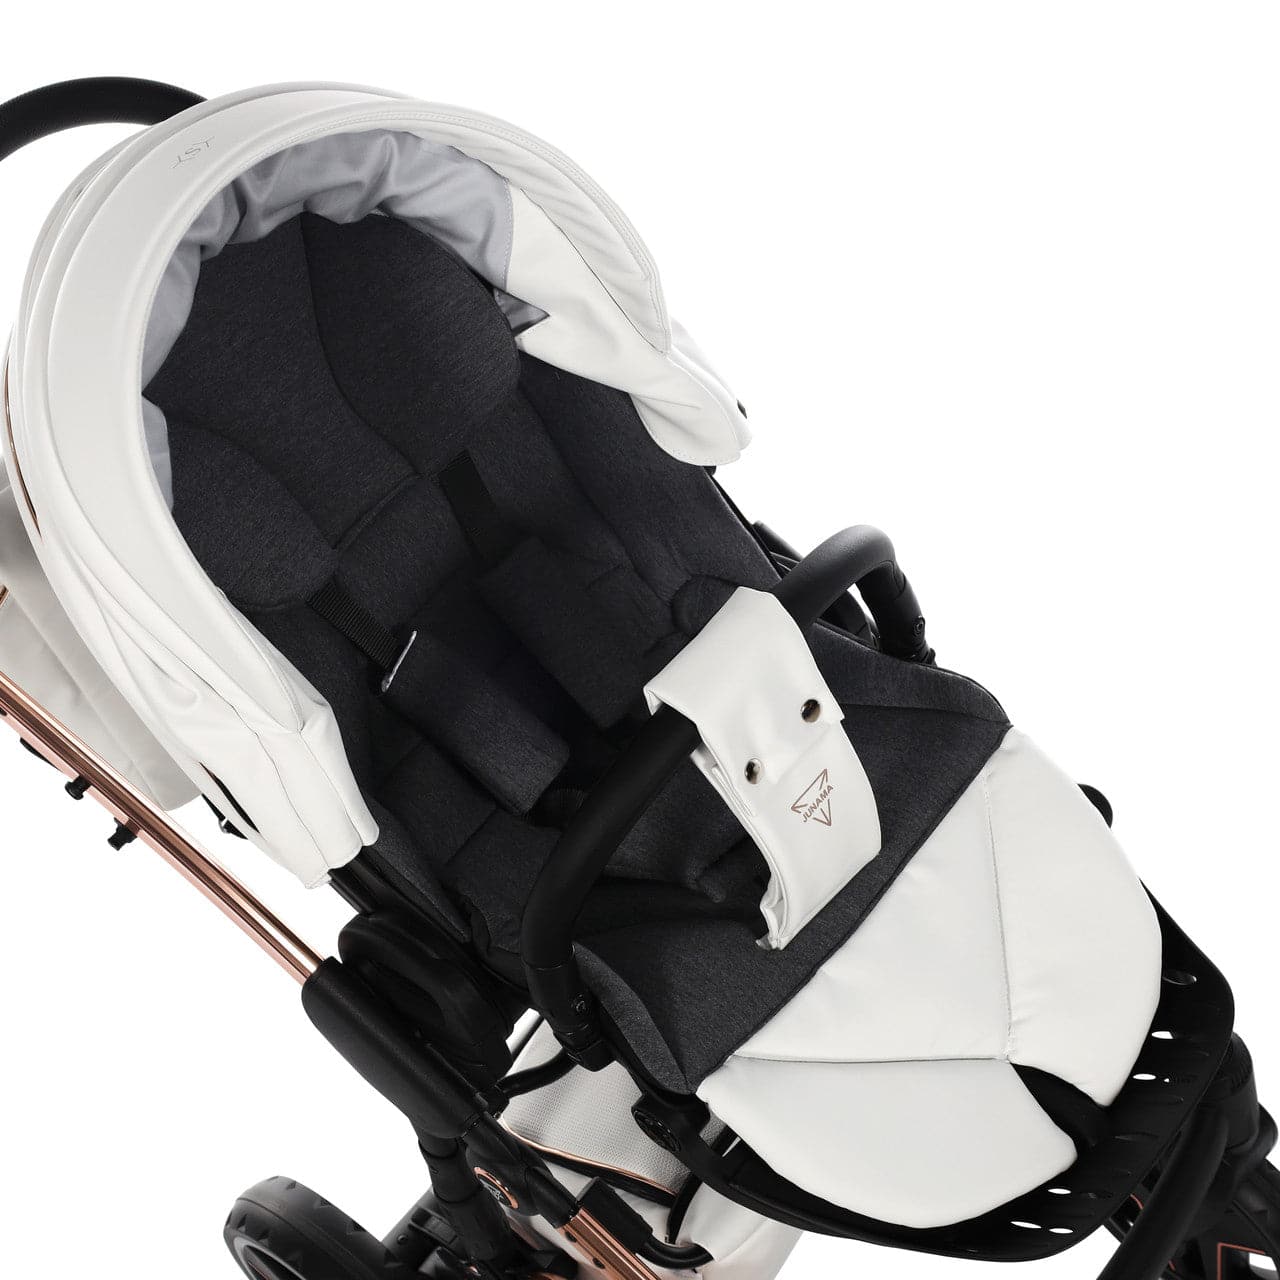 Junama S-Class 3 In 1 Travel System - White - For Your Little One